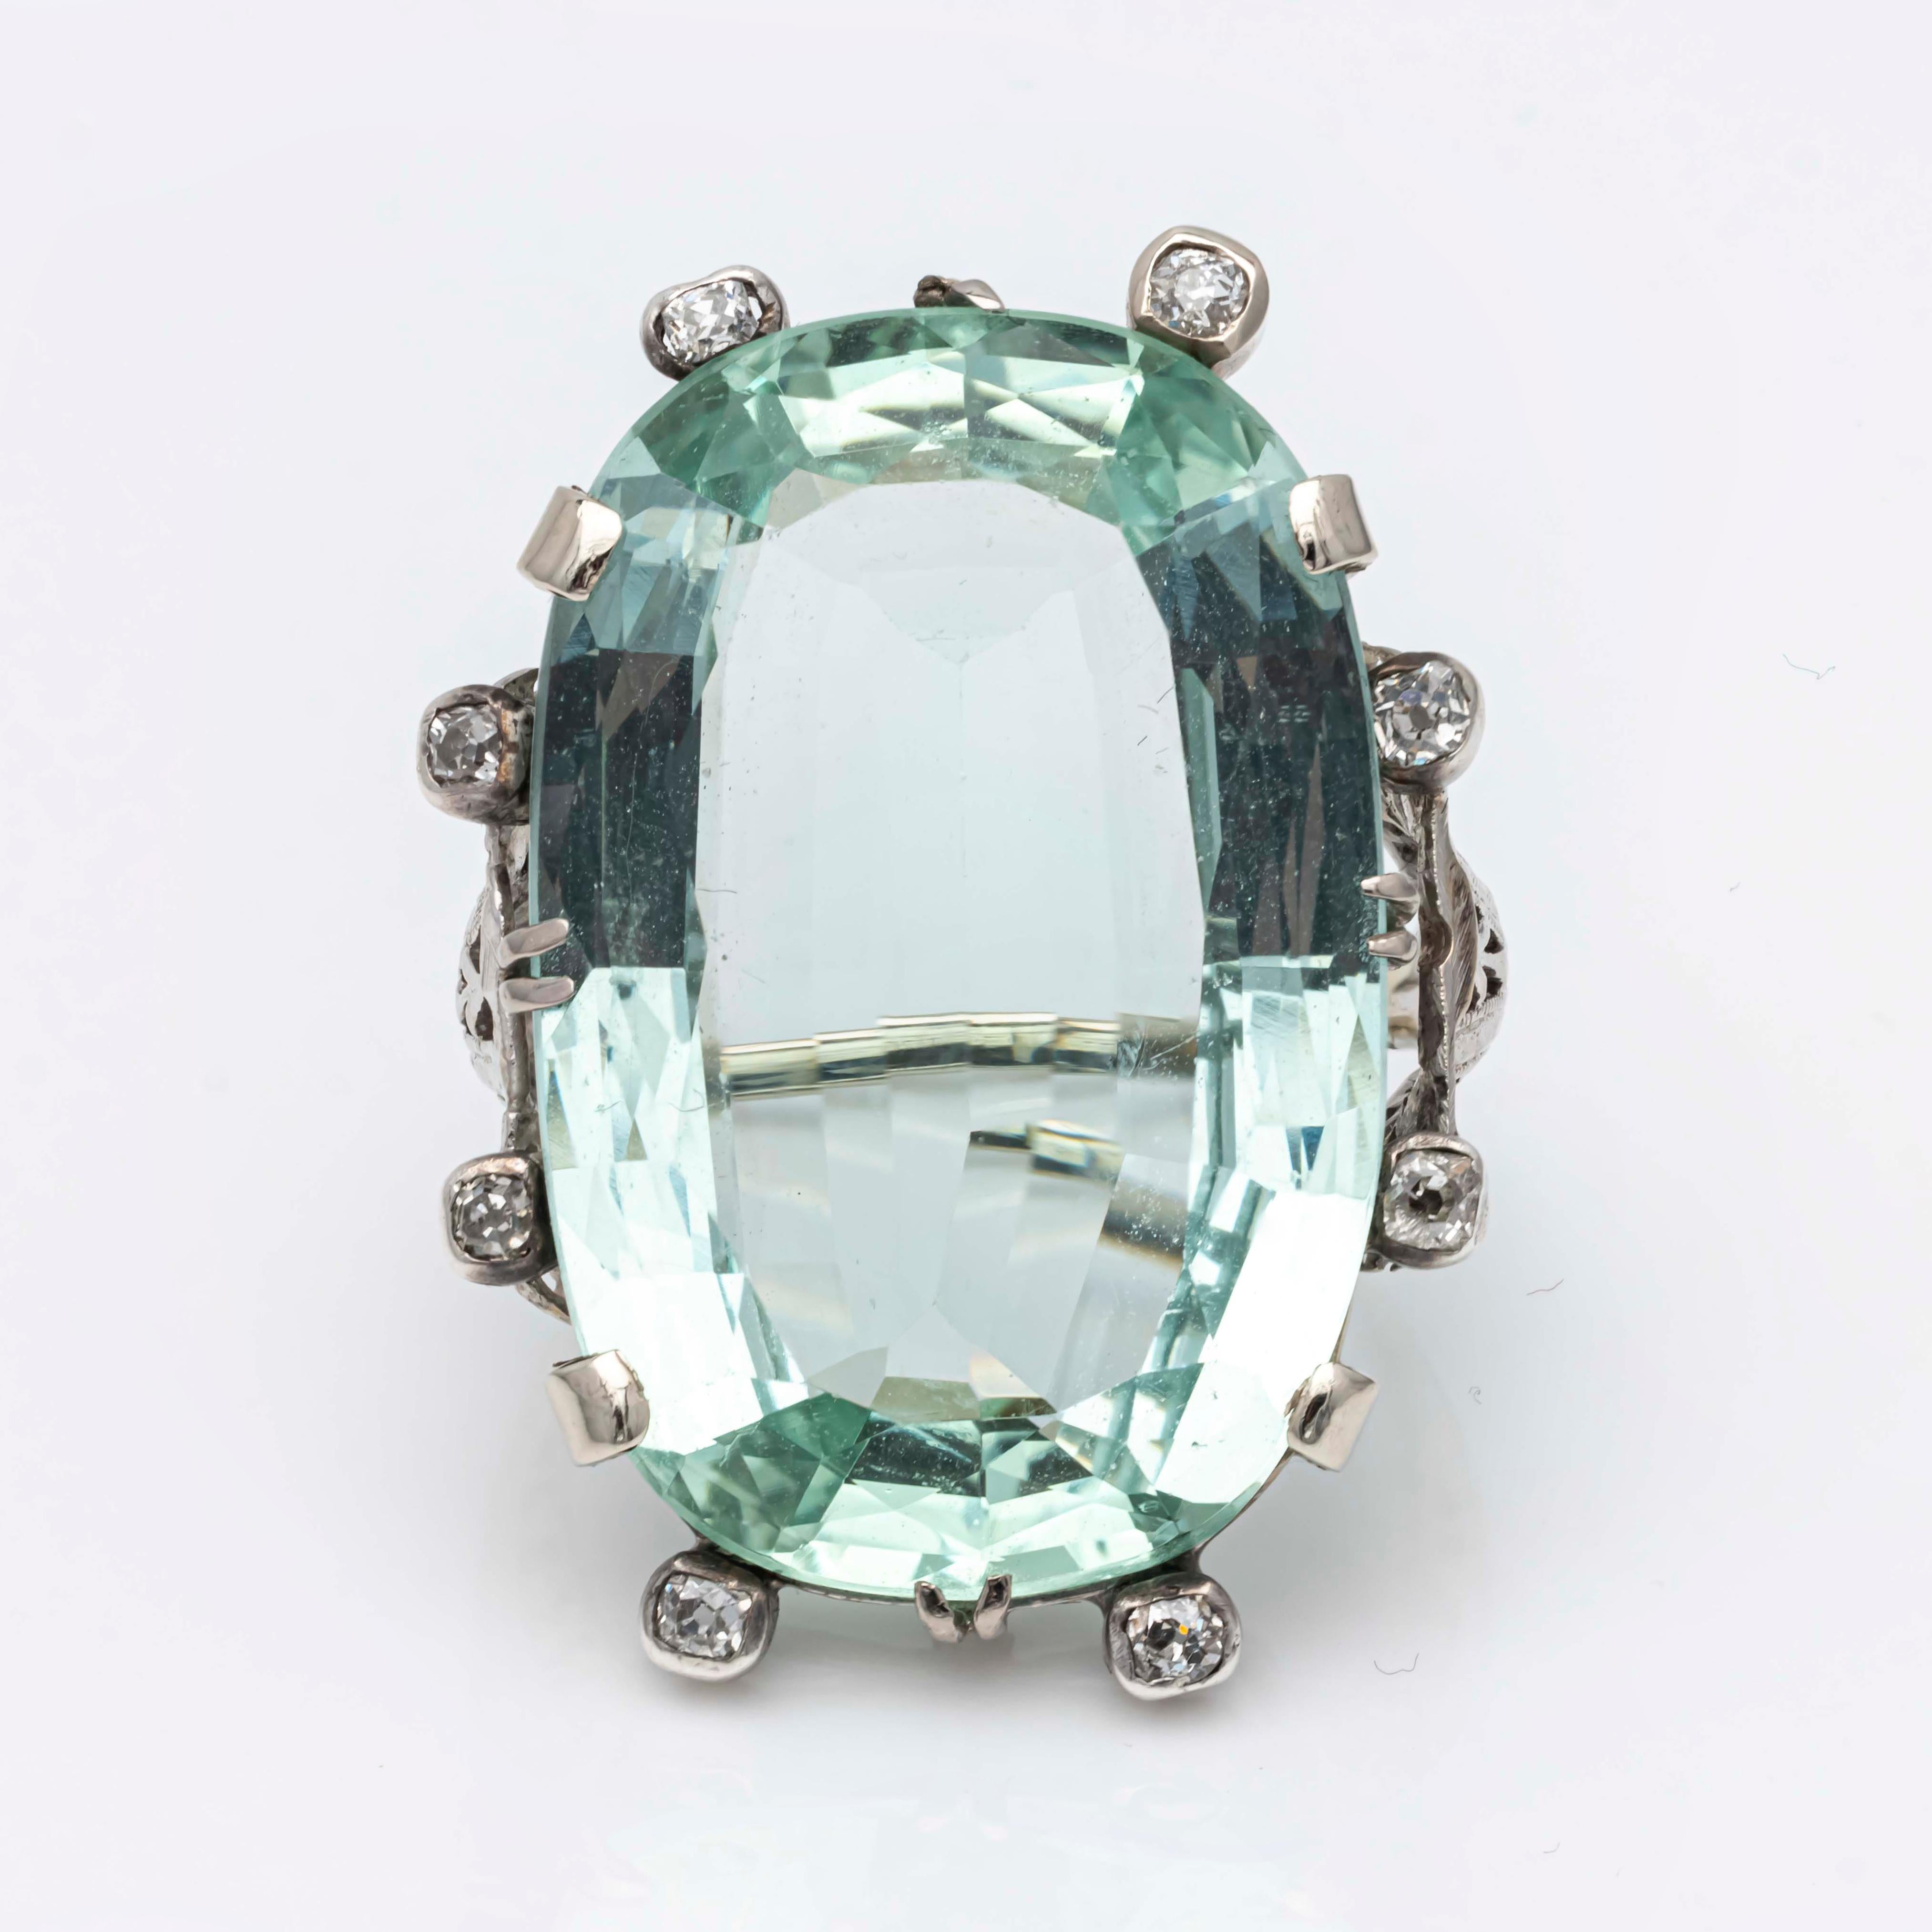 Features a natural green aquamarine stone weighing 34.18 carats set in an intricate antique looking ring design. Accented by 8 old mine cut diamonds weighing 0.42 carats total. Finely made in 18K White Gold. Size 7.5 US resizable upon request.  

